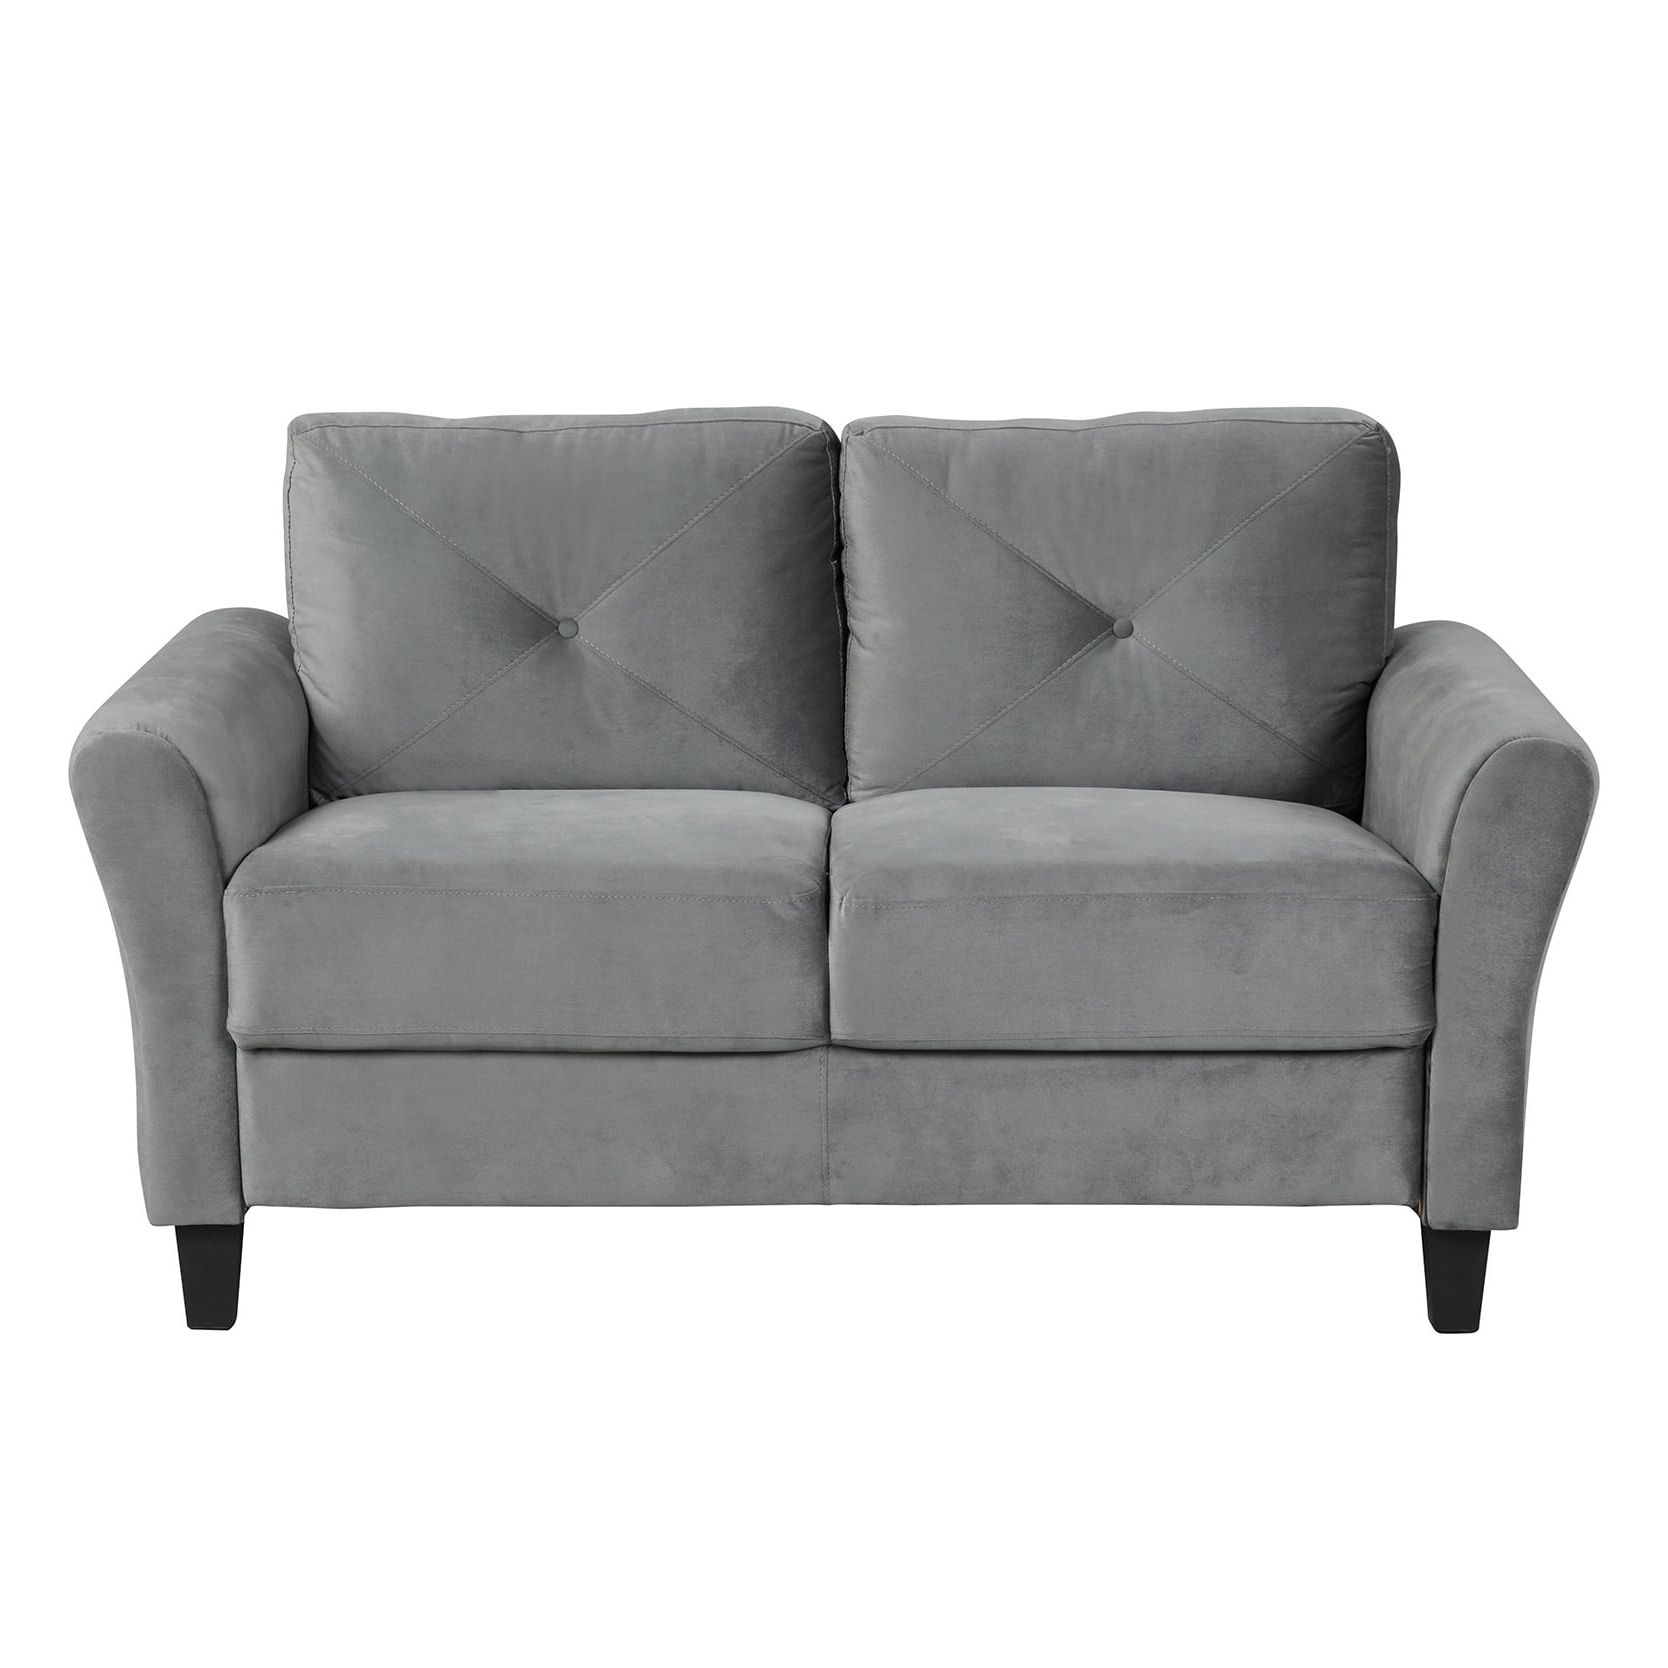 Modern Loveseat Sofa Sleeper Futon Couch Upholstered 2 Seater Sofa For Within Fashionable Modern Light Grey Loveseat Sofas (Photo 10 of 15)